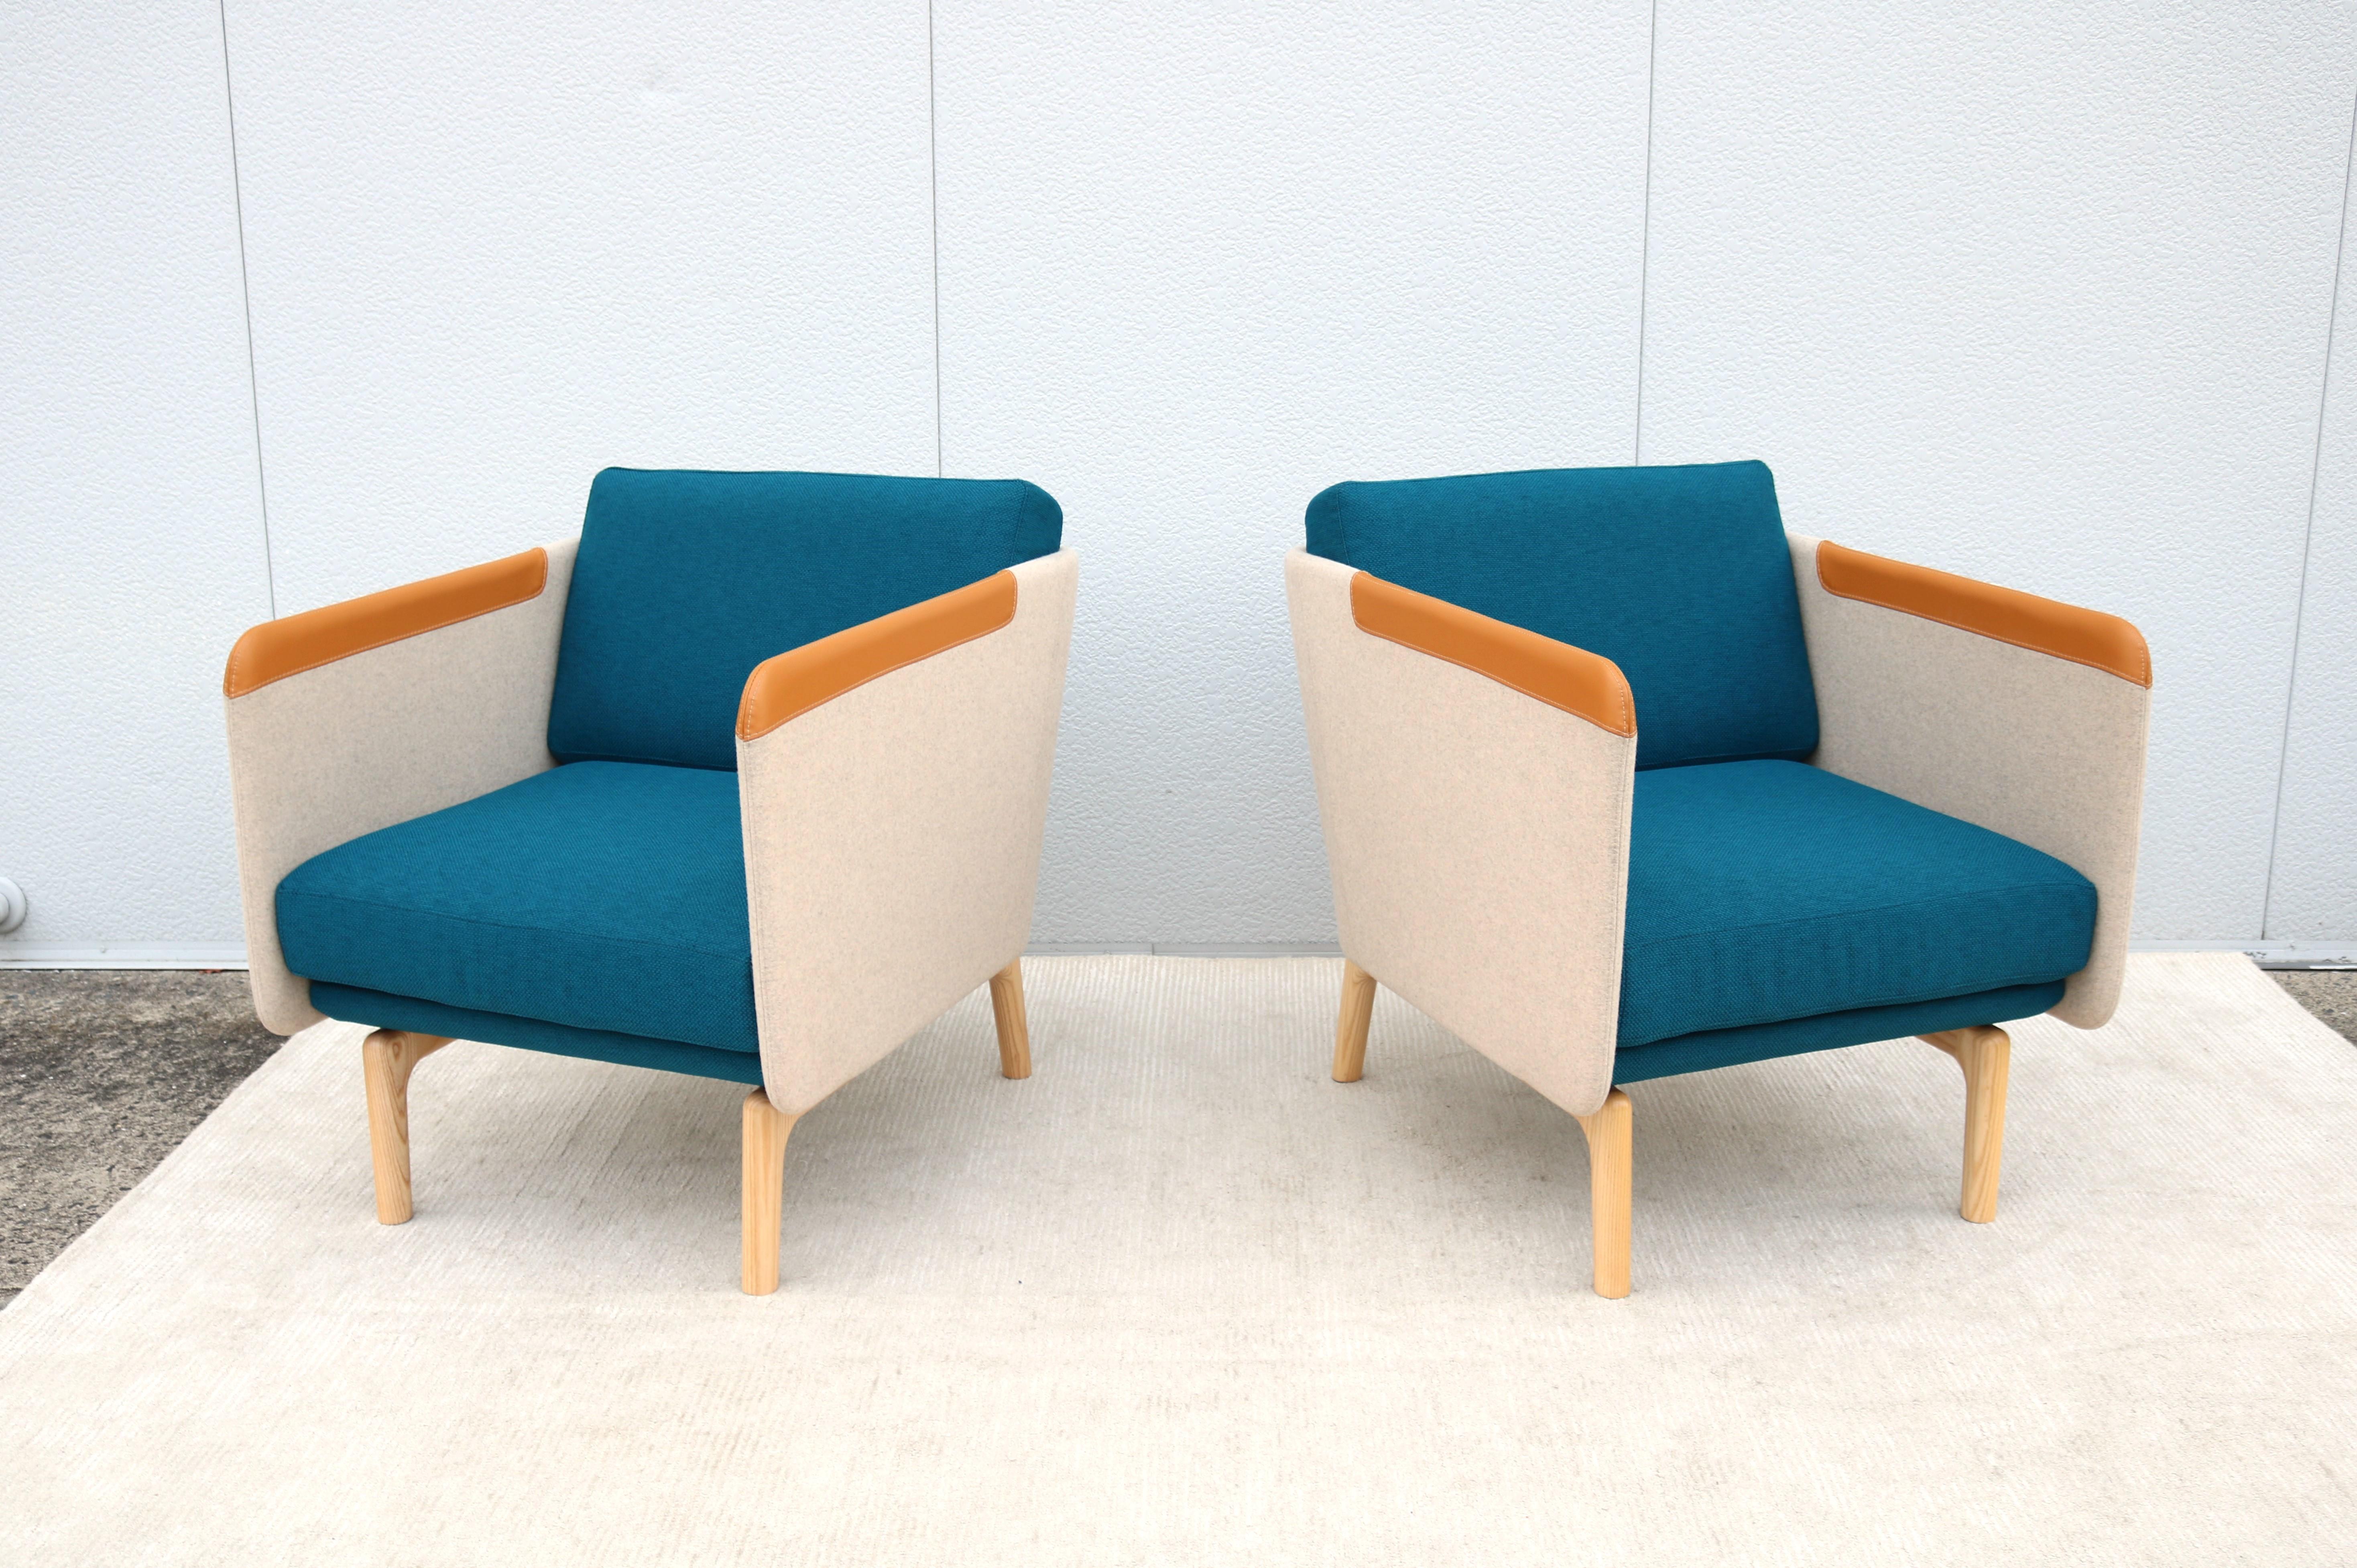 Contemporary Modern Roger Webb for OFS Heya Wool Lounge Chairs - a Pair For Sale 2